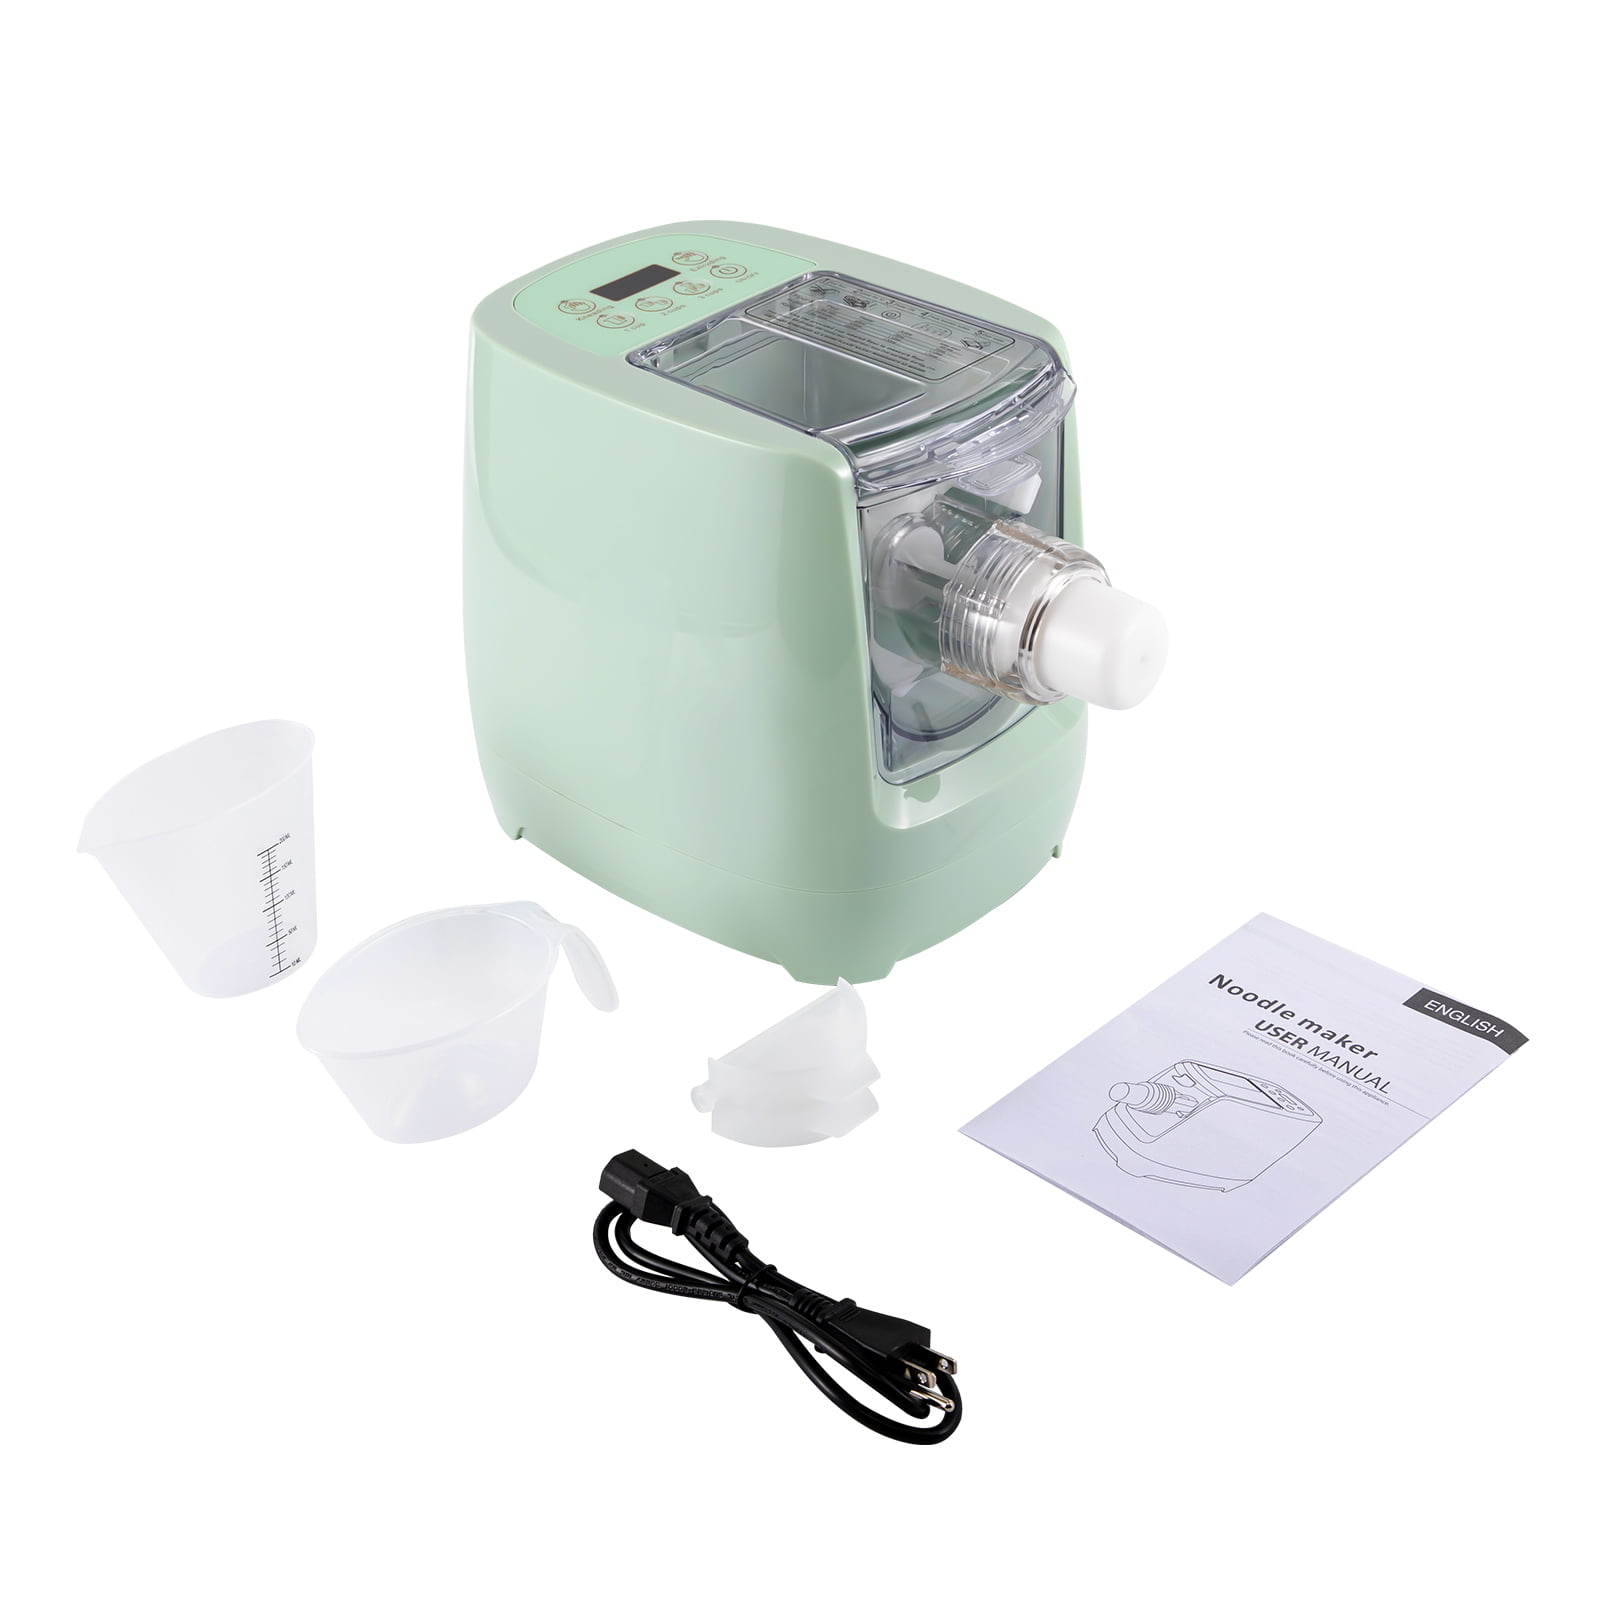 Electric Pasta Maker Machine Automatic Noodle Maker with 12 Pasta Shaping  Discs for Homemade Spaghetti Macaroni Lasagna and More 110V (Green)